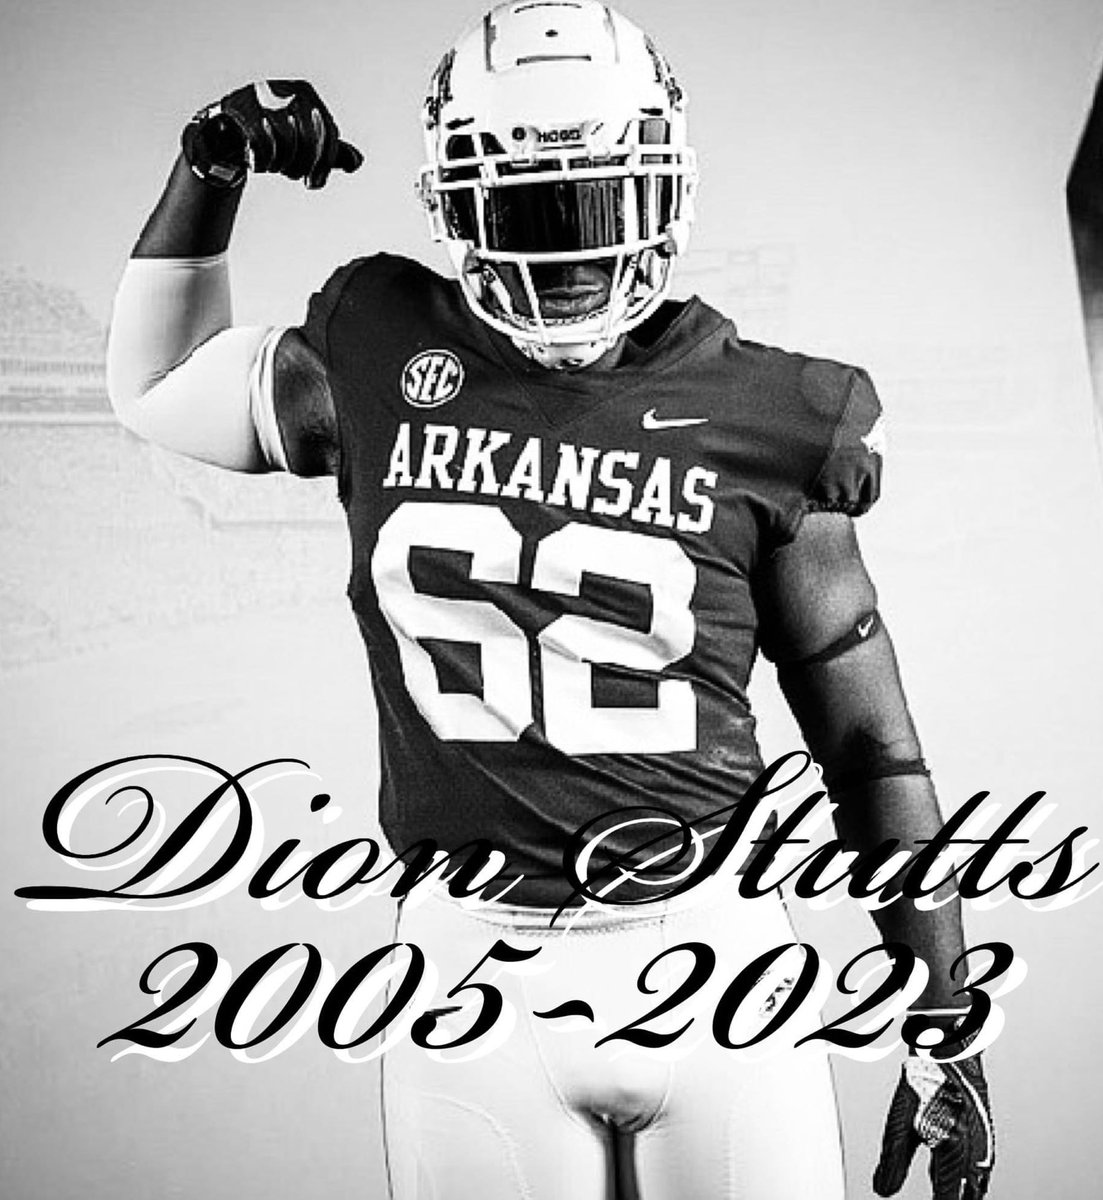 Our thoughts and prayers go out to the Stutts family. Rest in peace Dion Stutts. You will be dearly missed. 🕊️🙏🏽 #hog4life